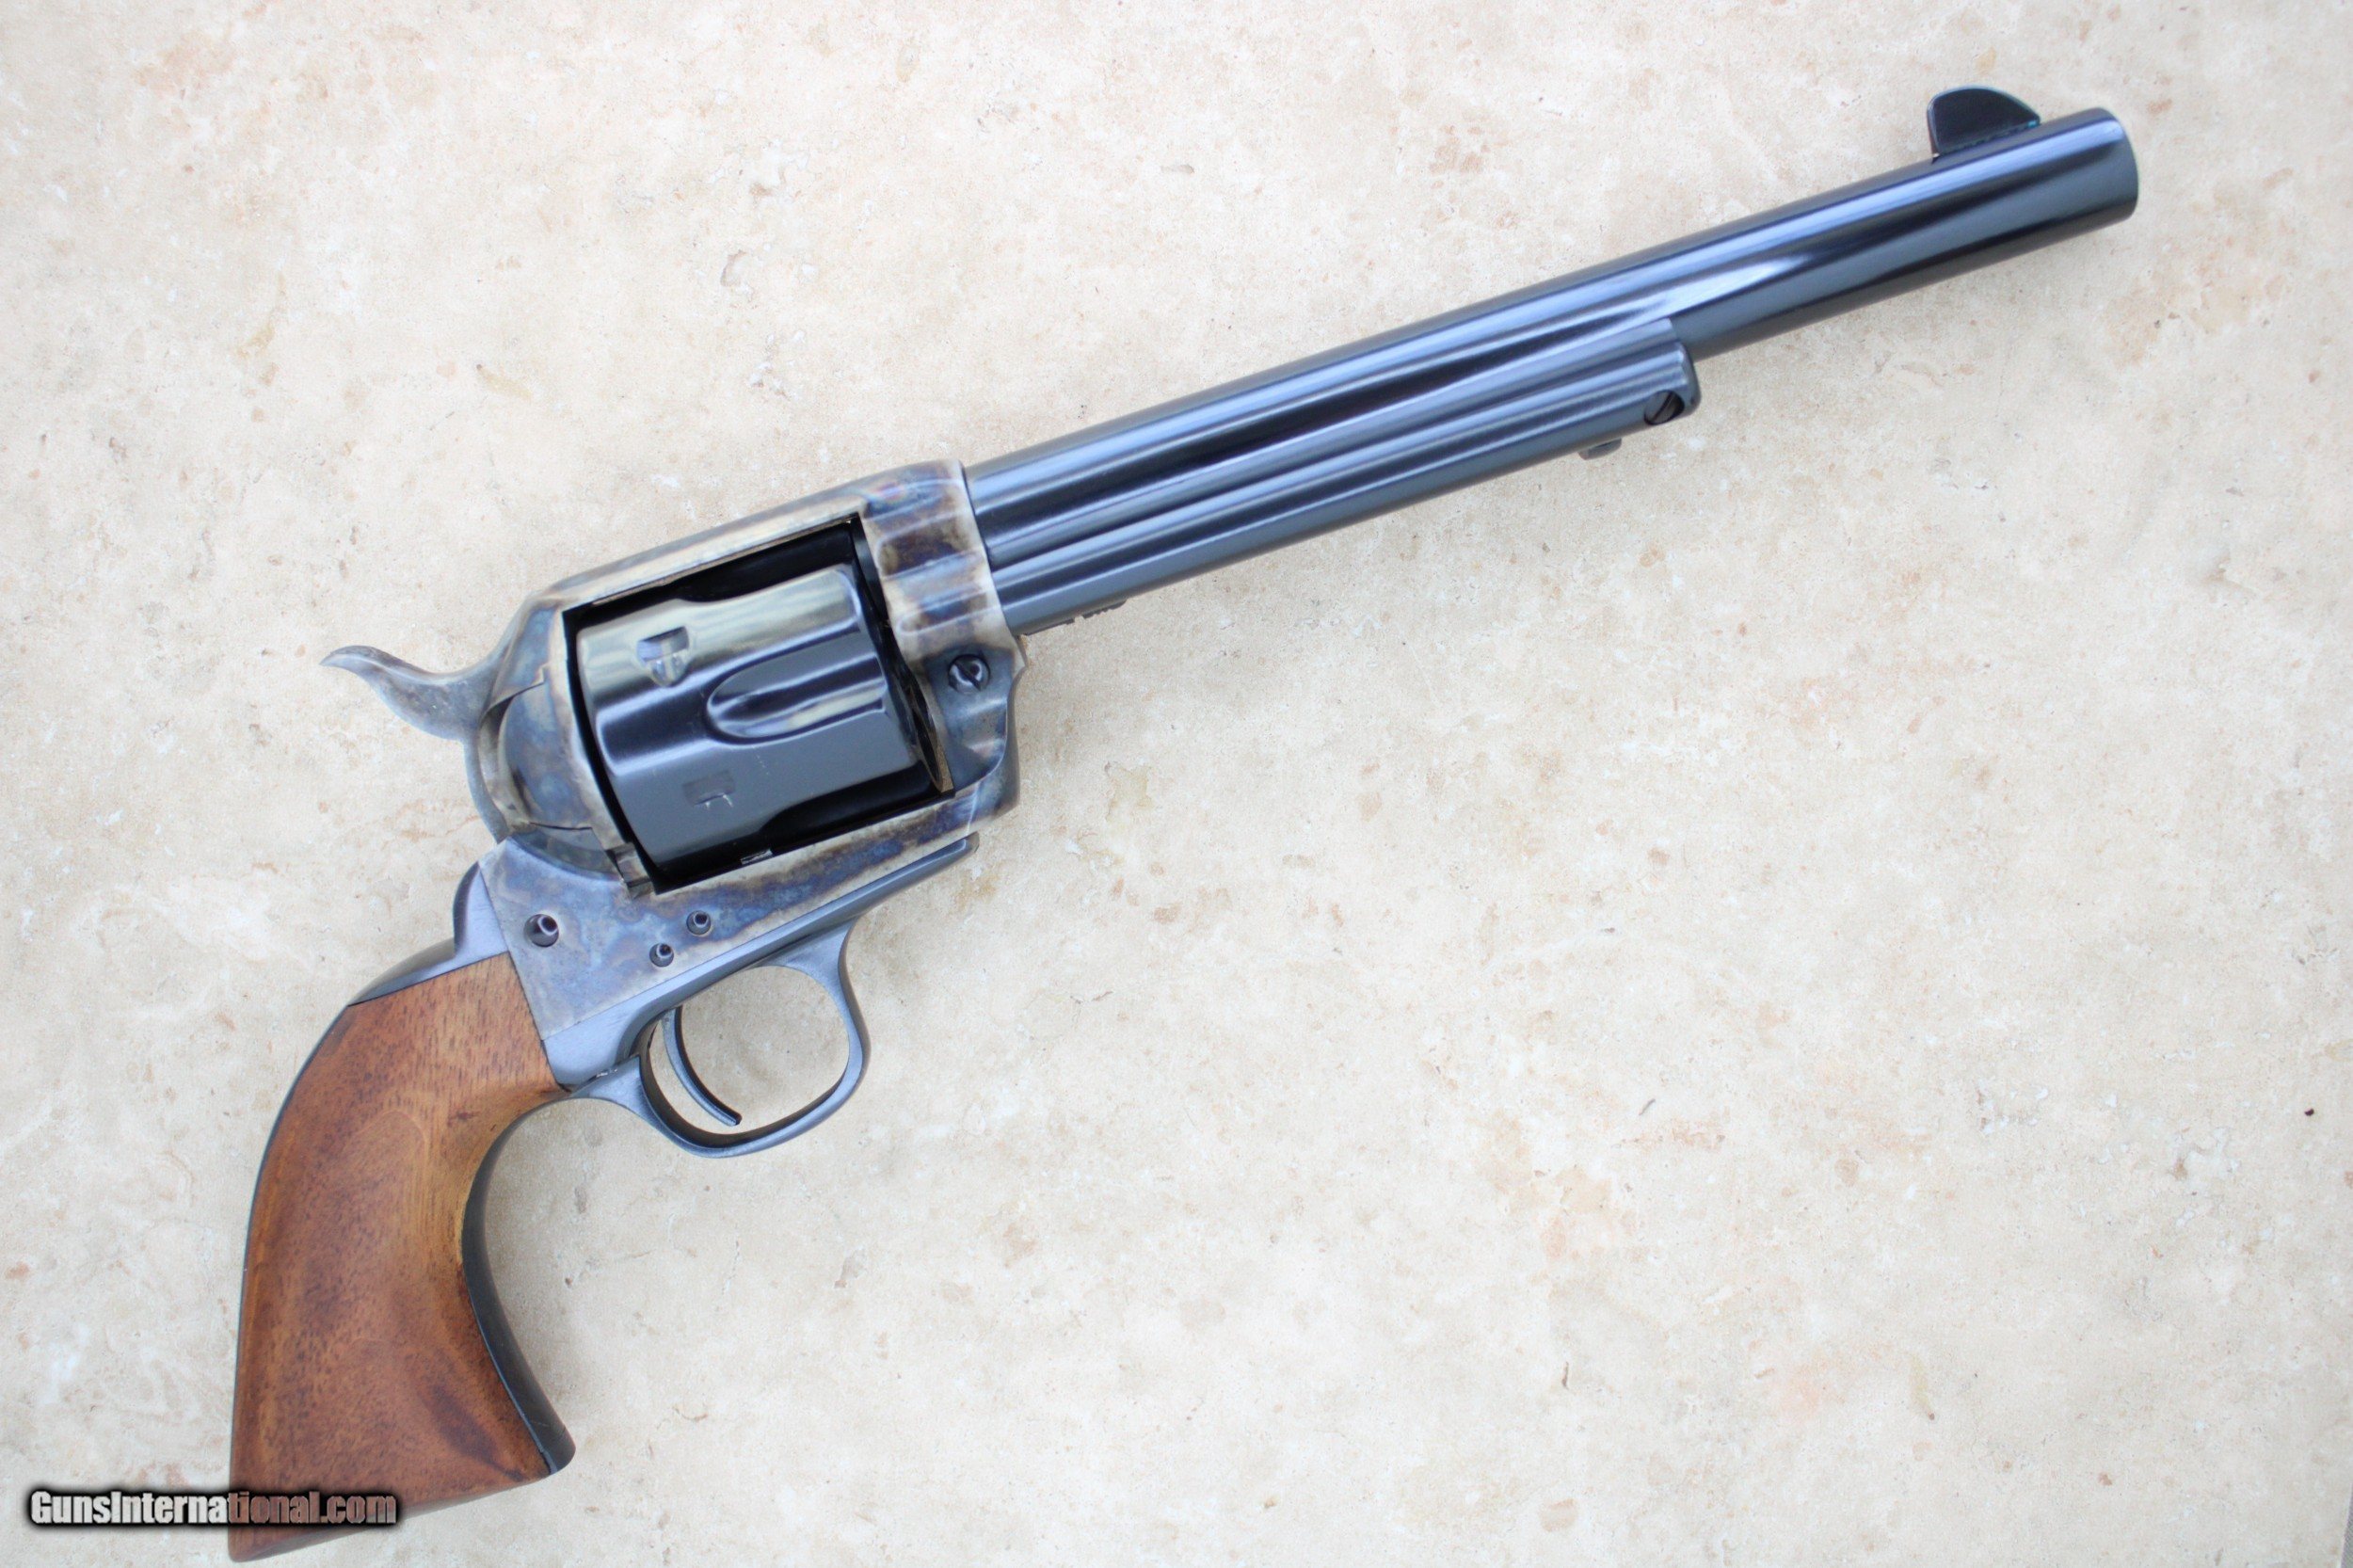 SOLD** American Western Arms Longhorn chambered in .45 Colt w/ 7.5 